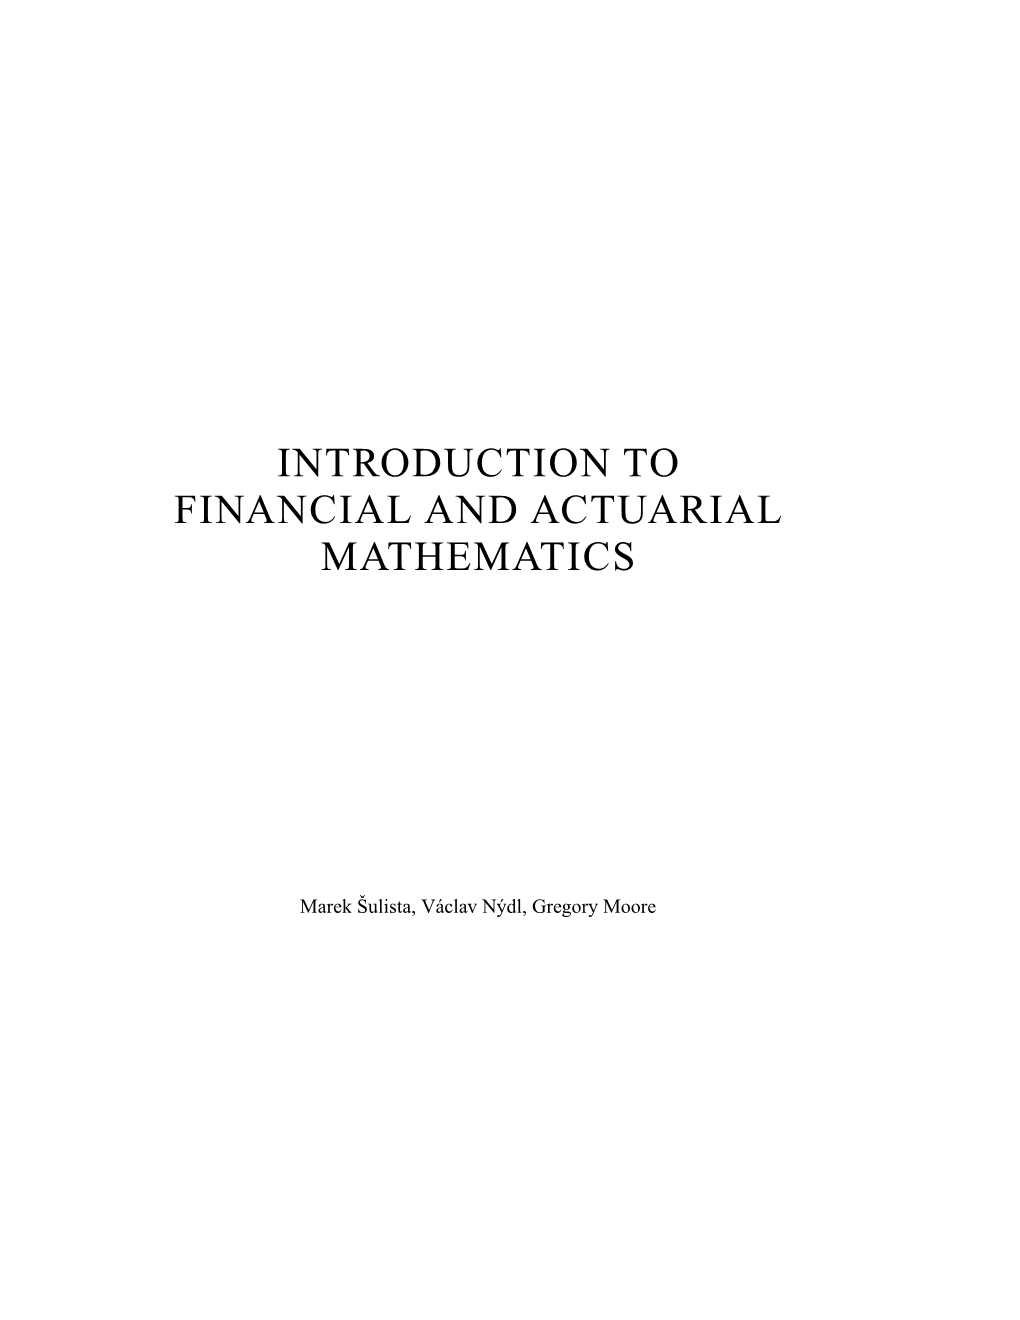 Introduction to Financial and Actuarial Mathematics